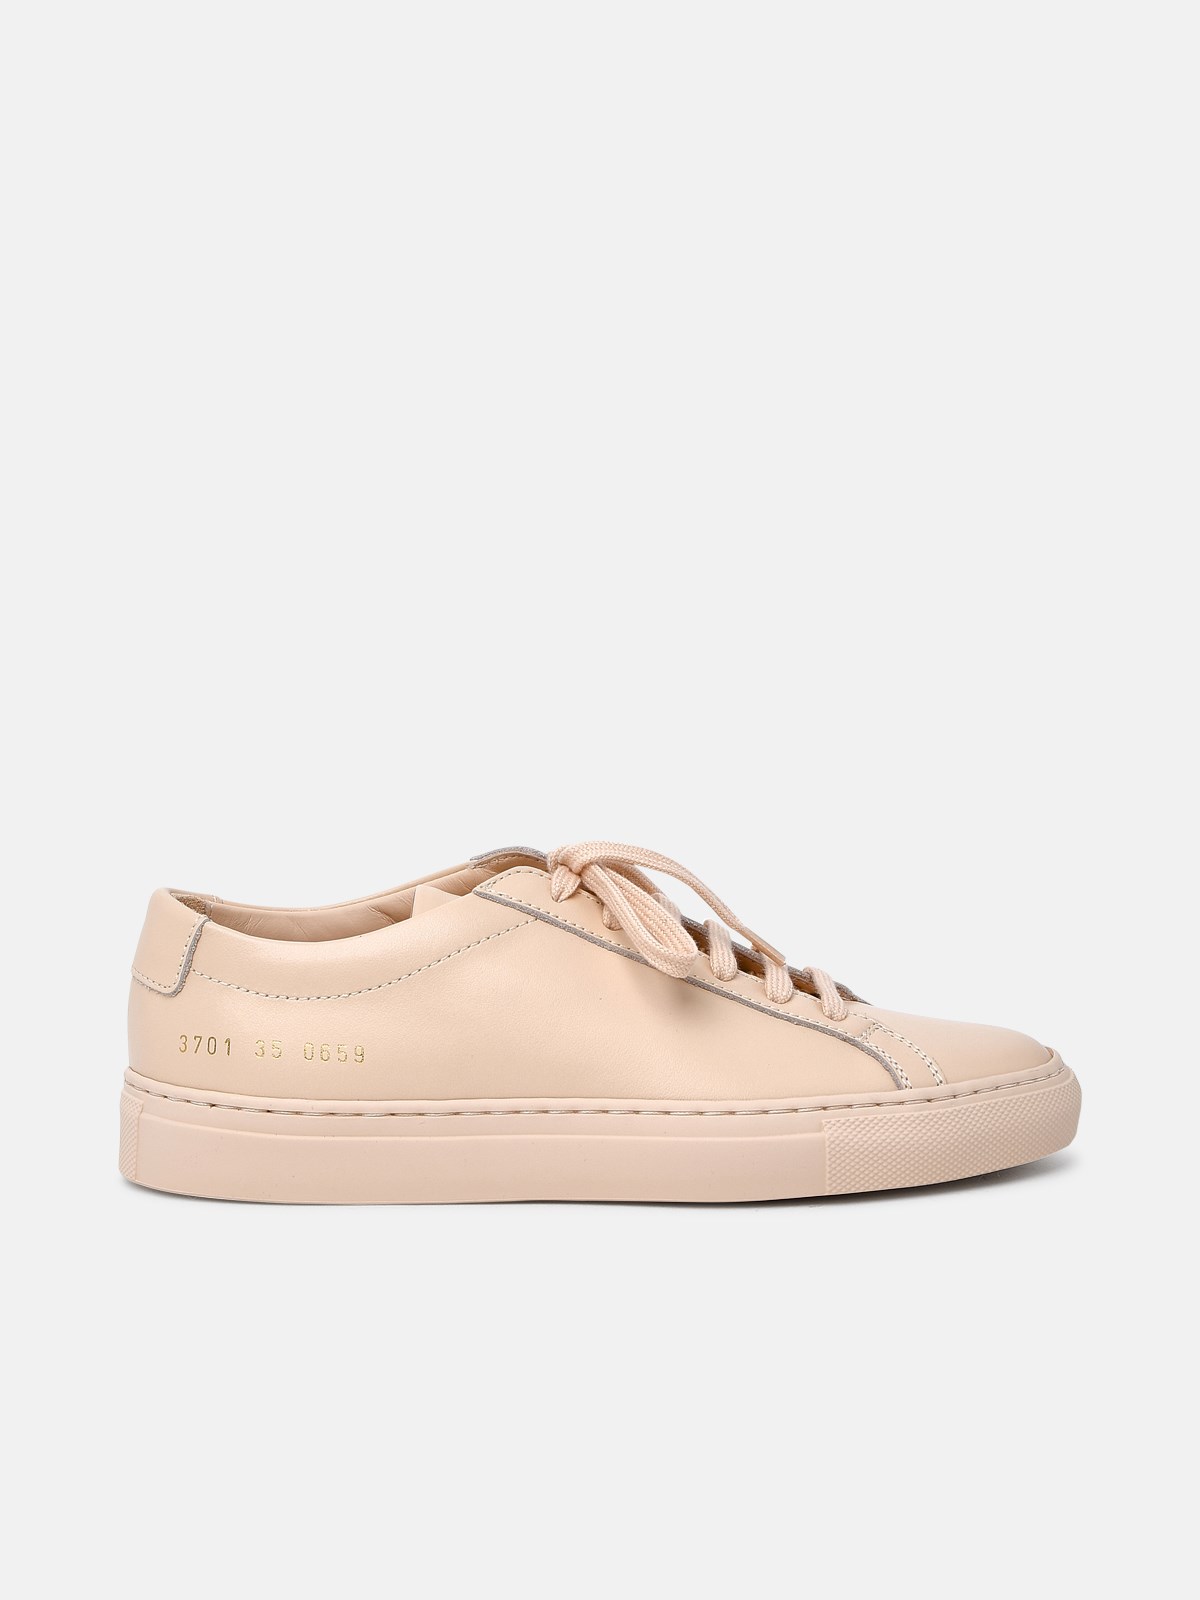 COMMON PROJECTS NUDE LEATHER ACHILLES SNEAKERS